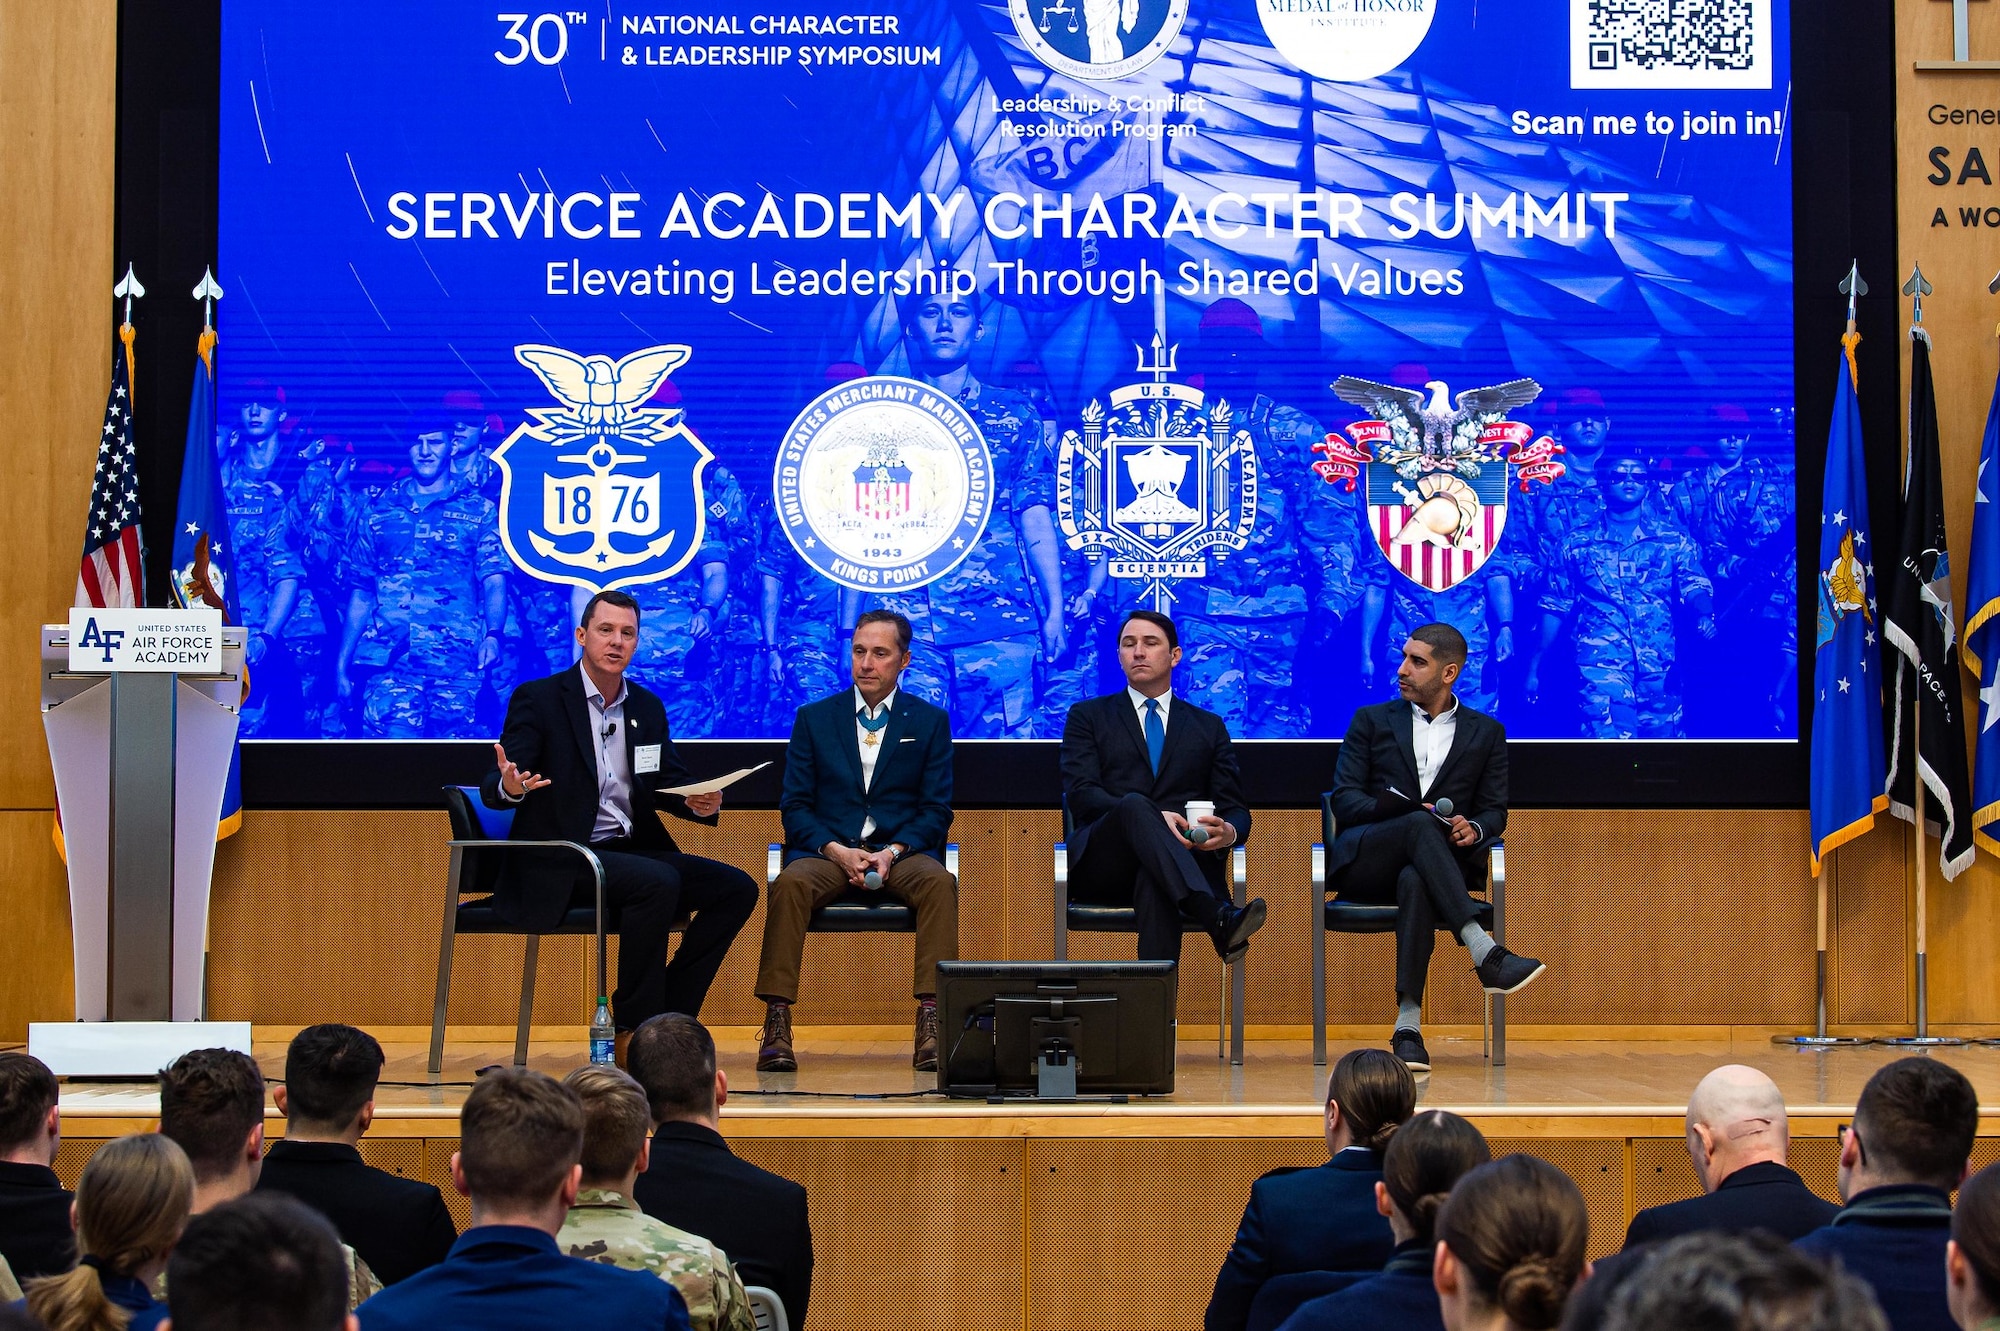 A panel discussion during a Service Academy Character Summit